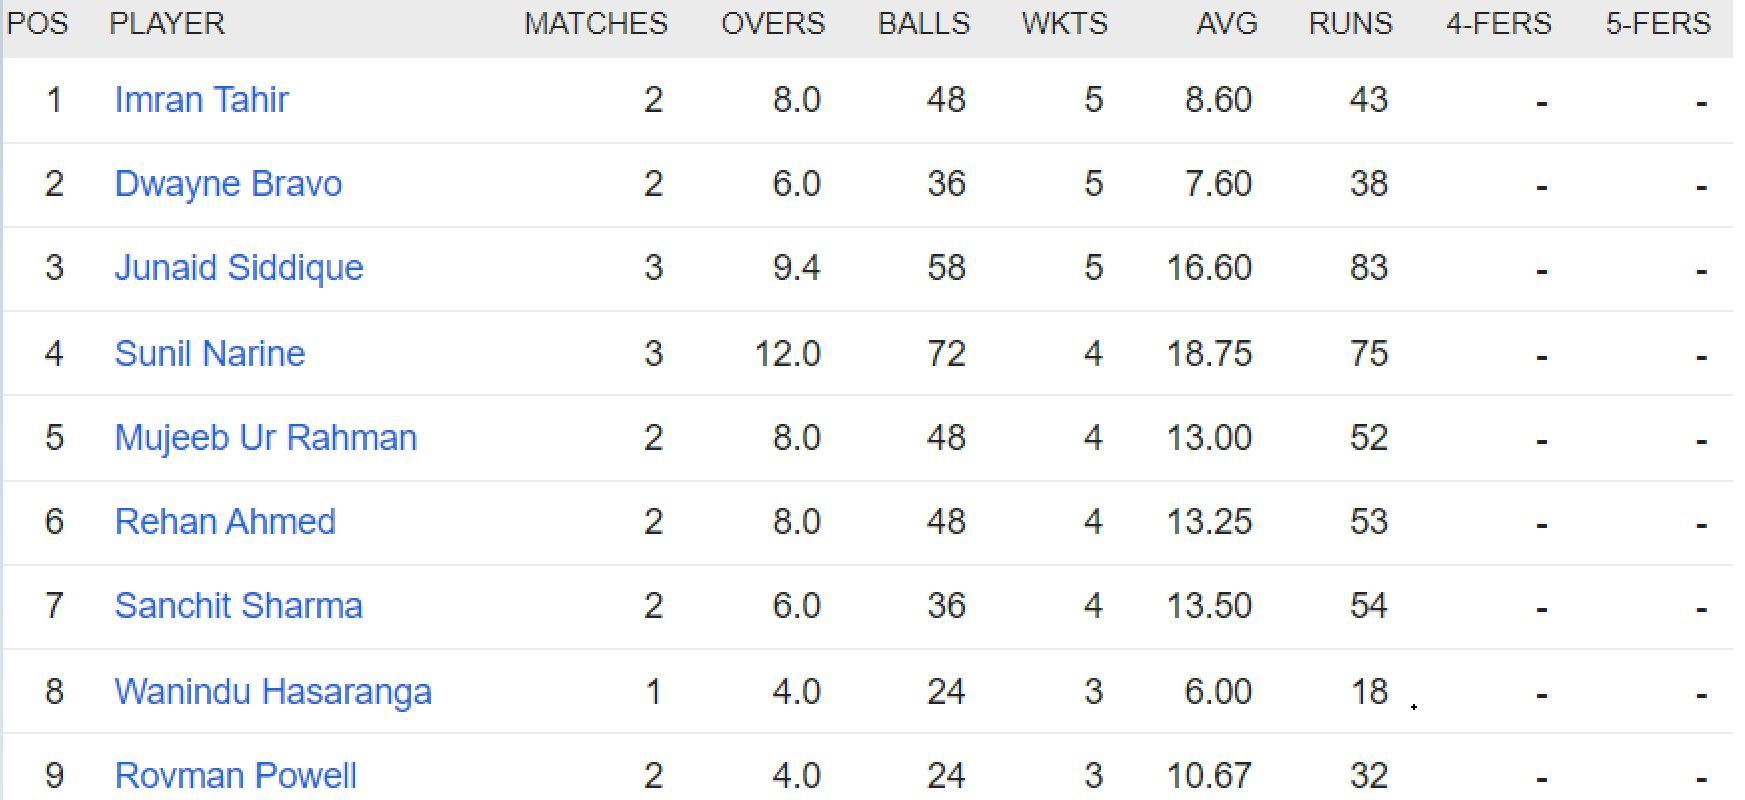 Updated list of wicket-takers in ILT20